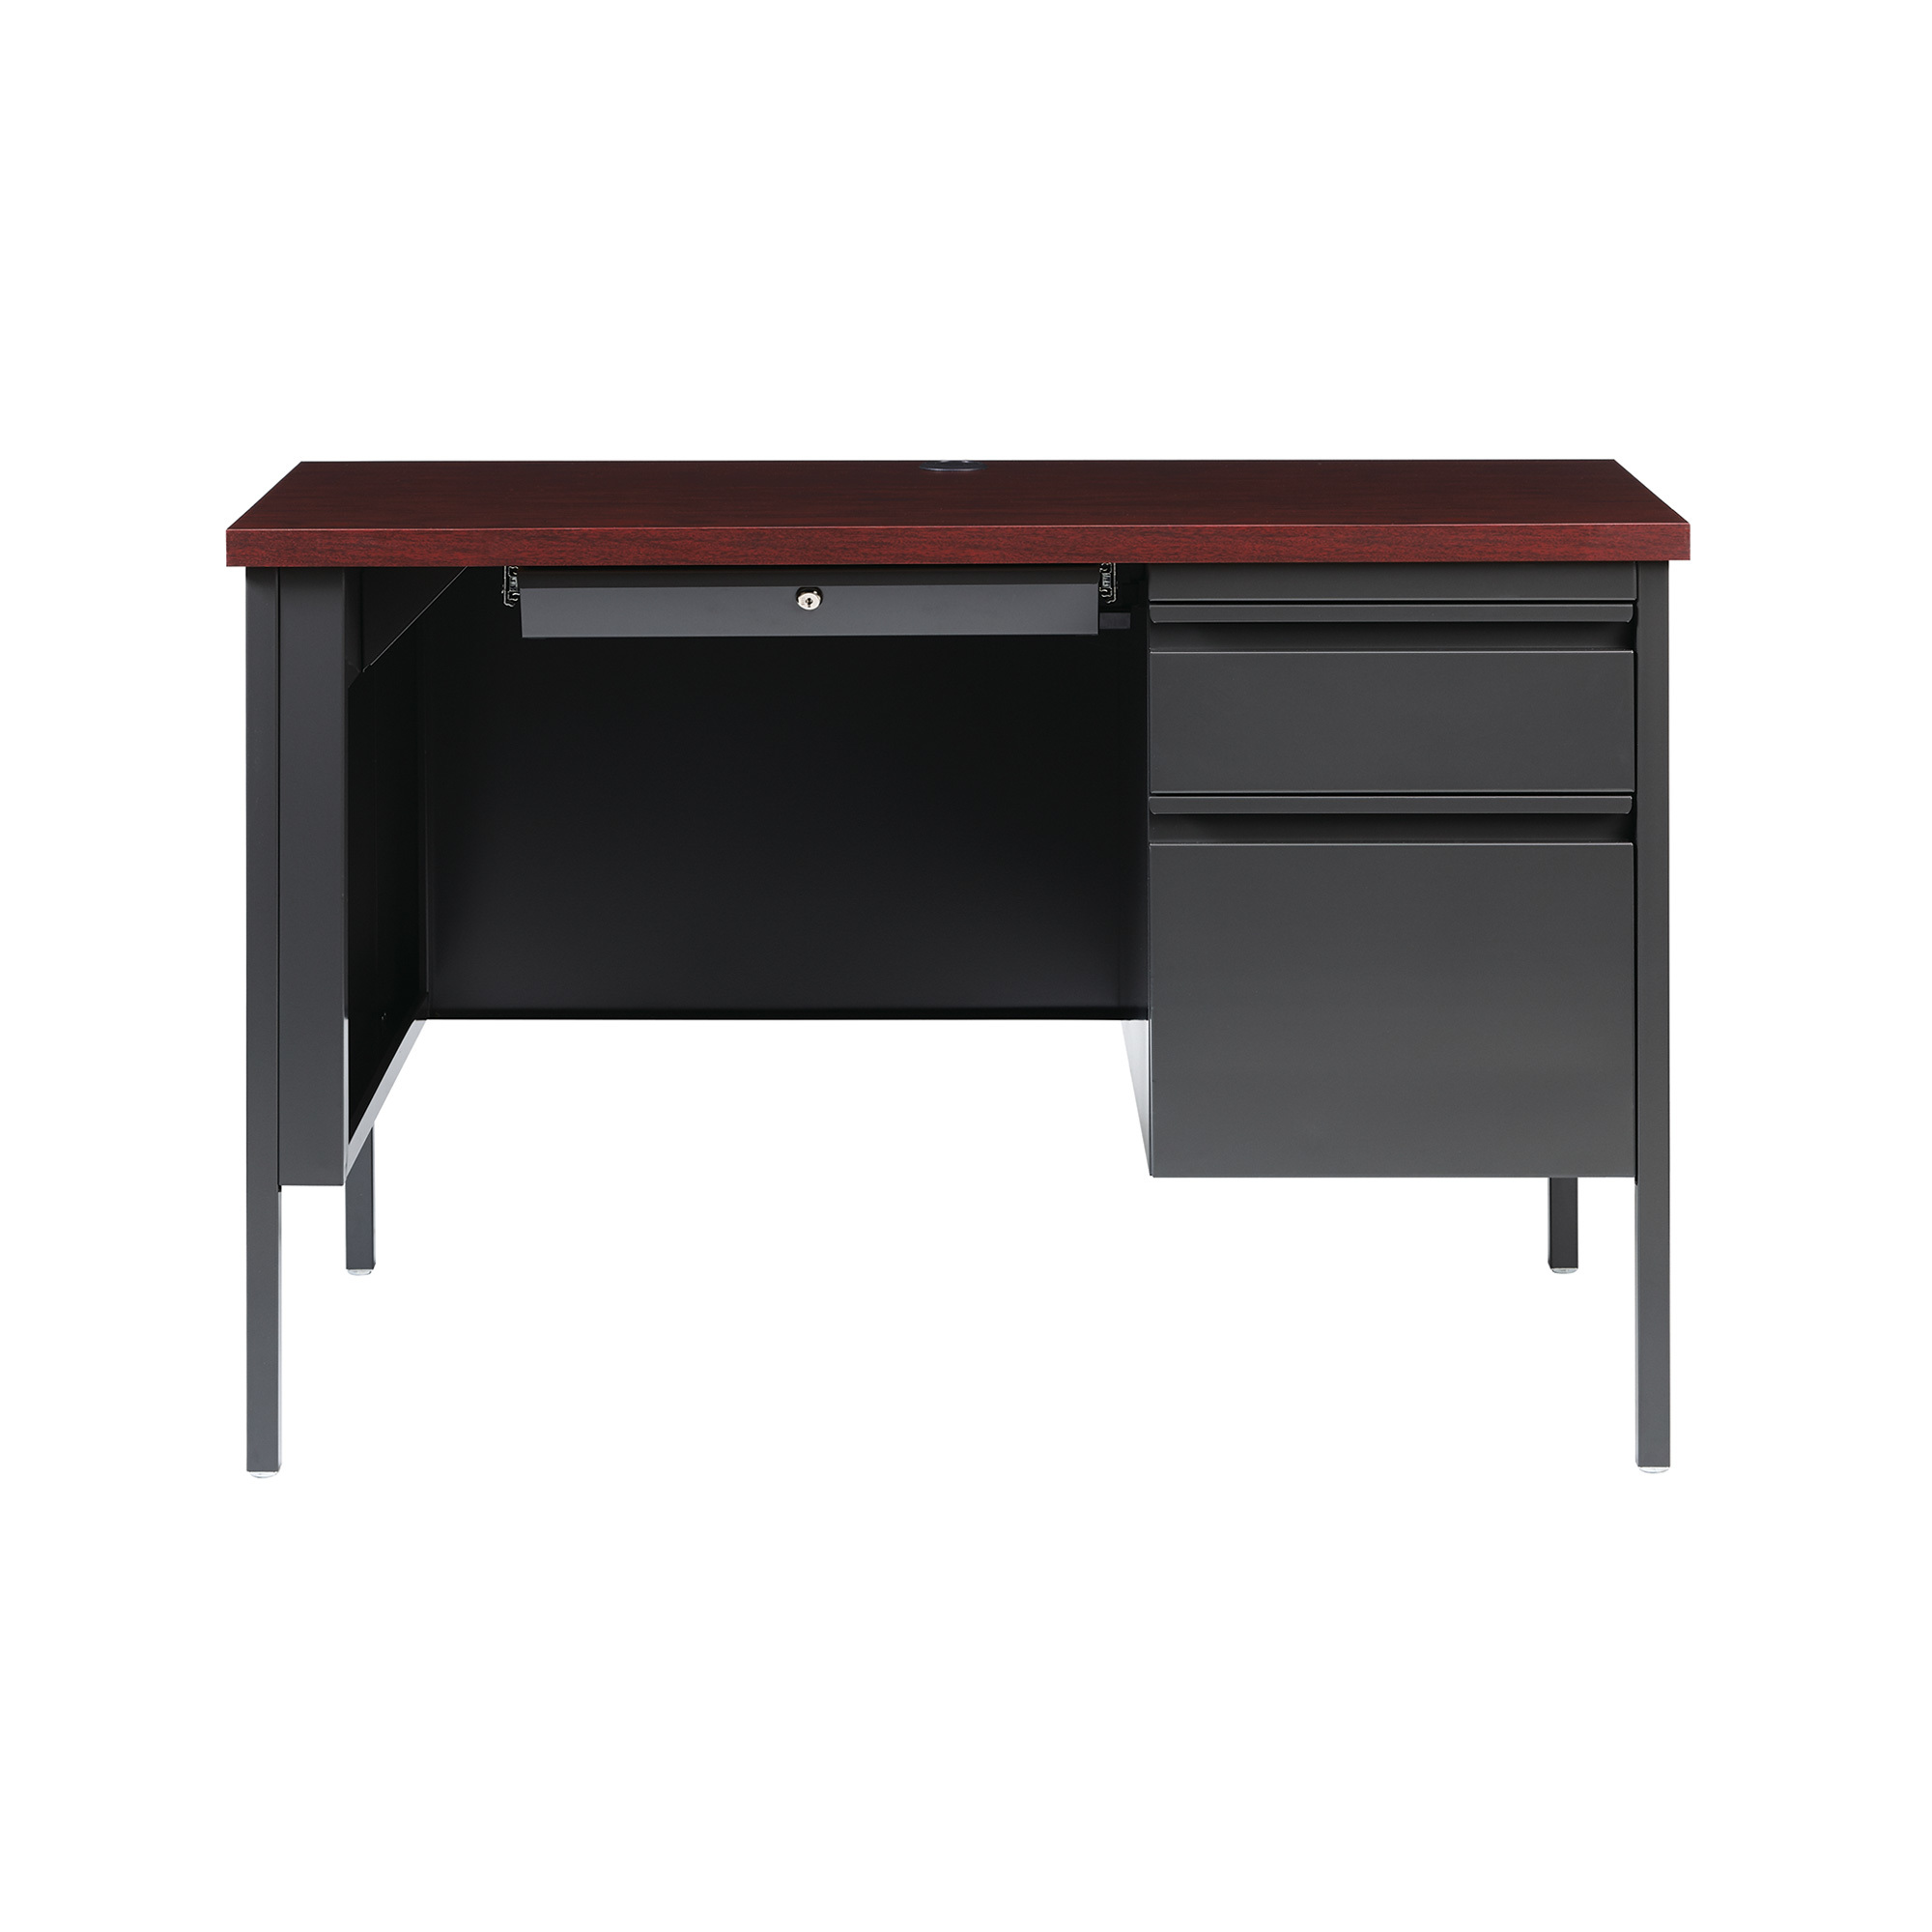 Hirsh Right-Handed Single Desk on Pedestal — Charcoal/Mahogany, 45 1/2Inch W x 24Inch D x 29 1/2Inch H, Model 22201 -  Hirsh Industries